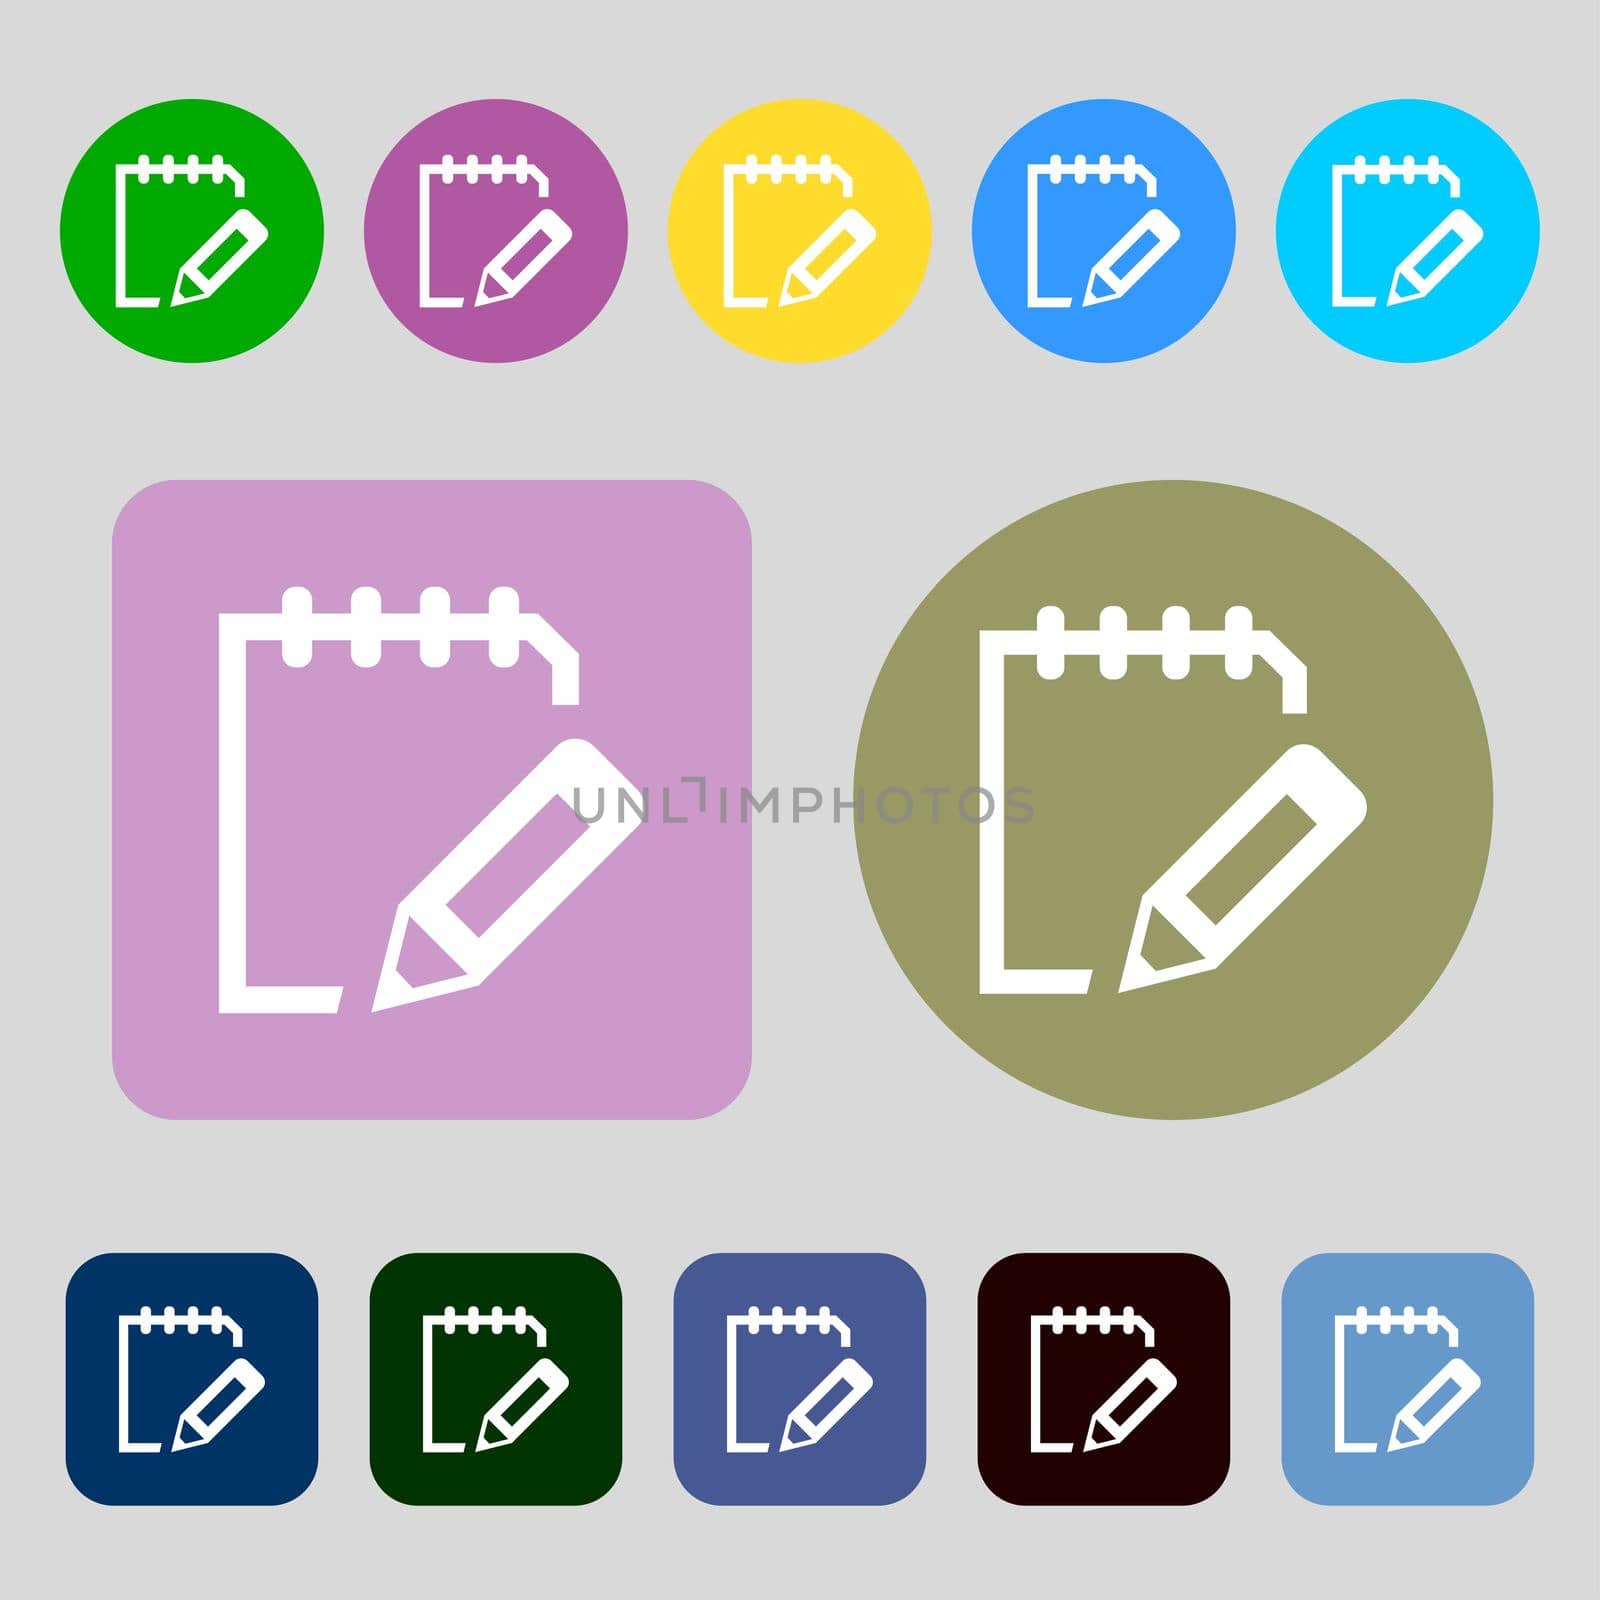 Edit document sign icon.12 colored buttons. Flat design. illustration